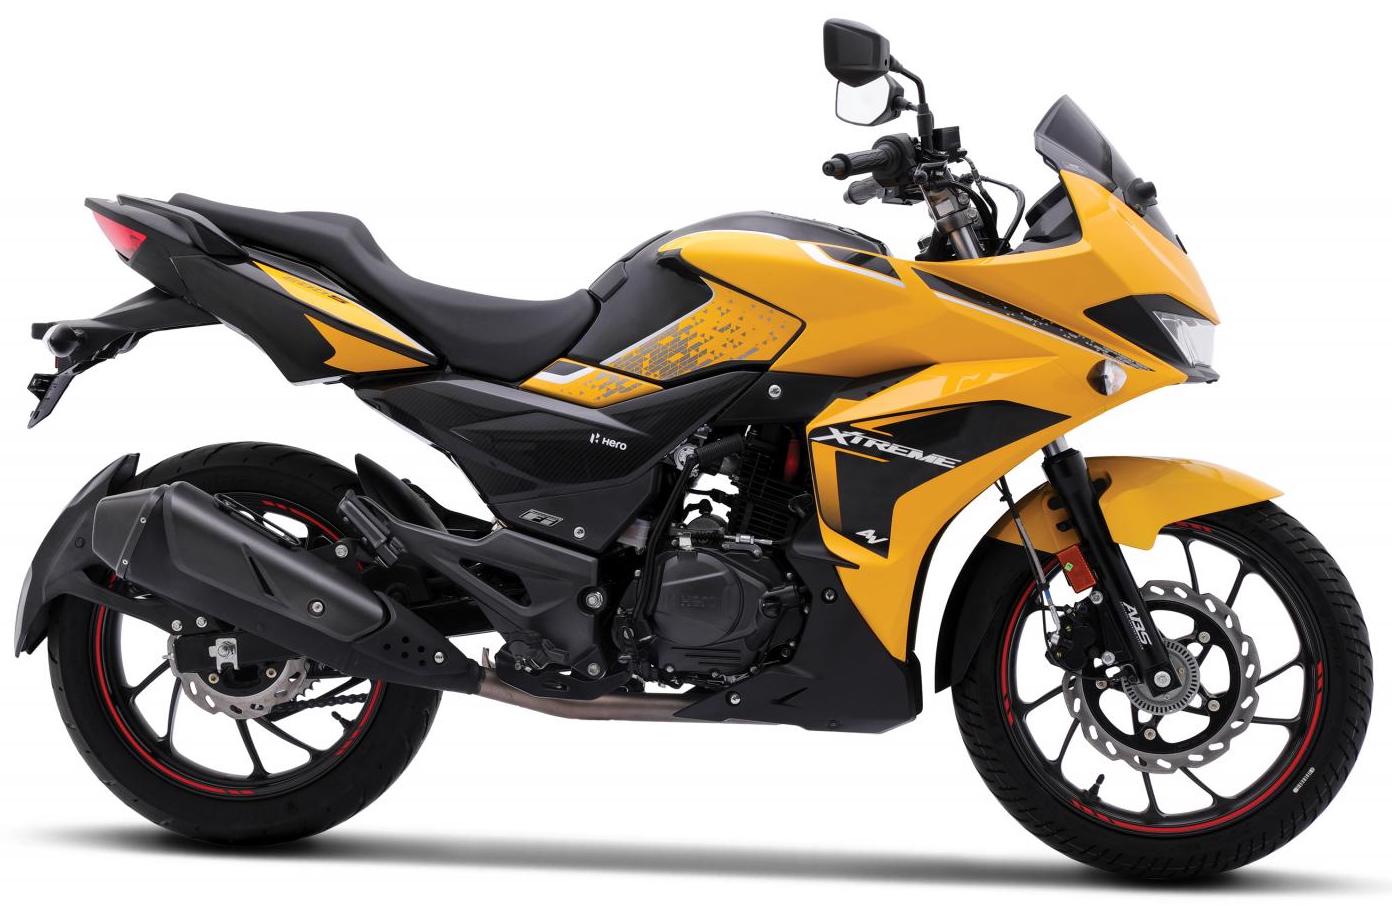 New 200cc Hero Sports Bike Launched in India at Rs 1.41 lakh - snap